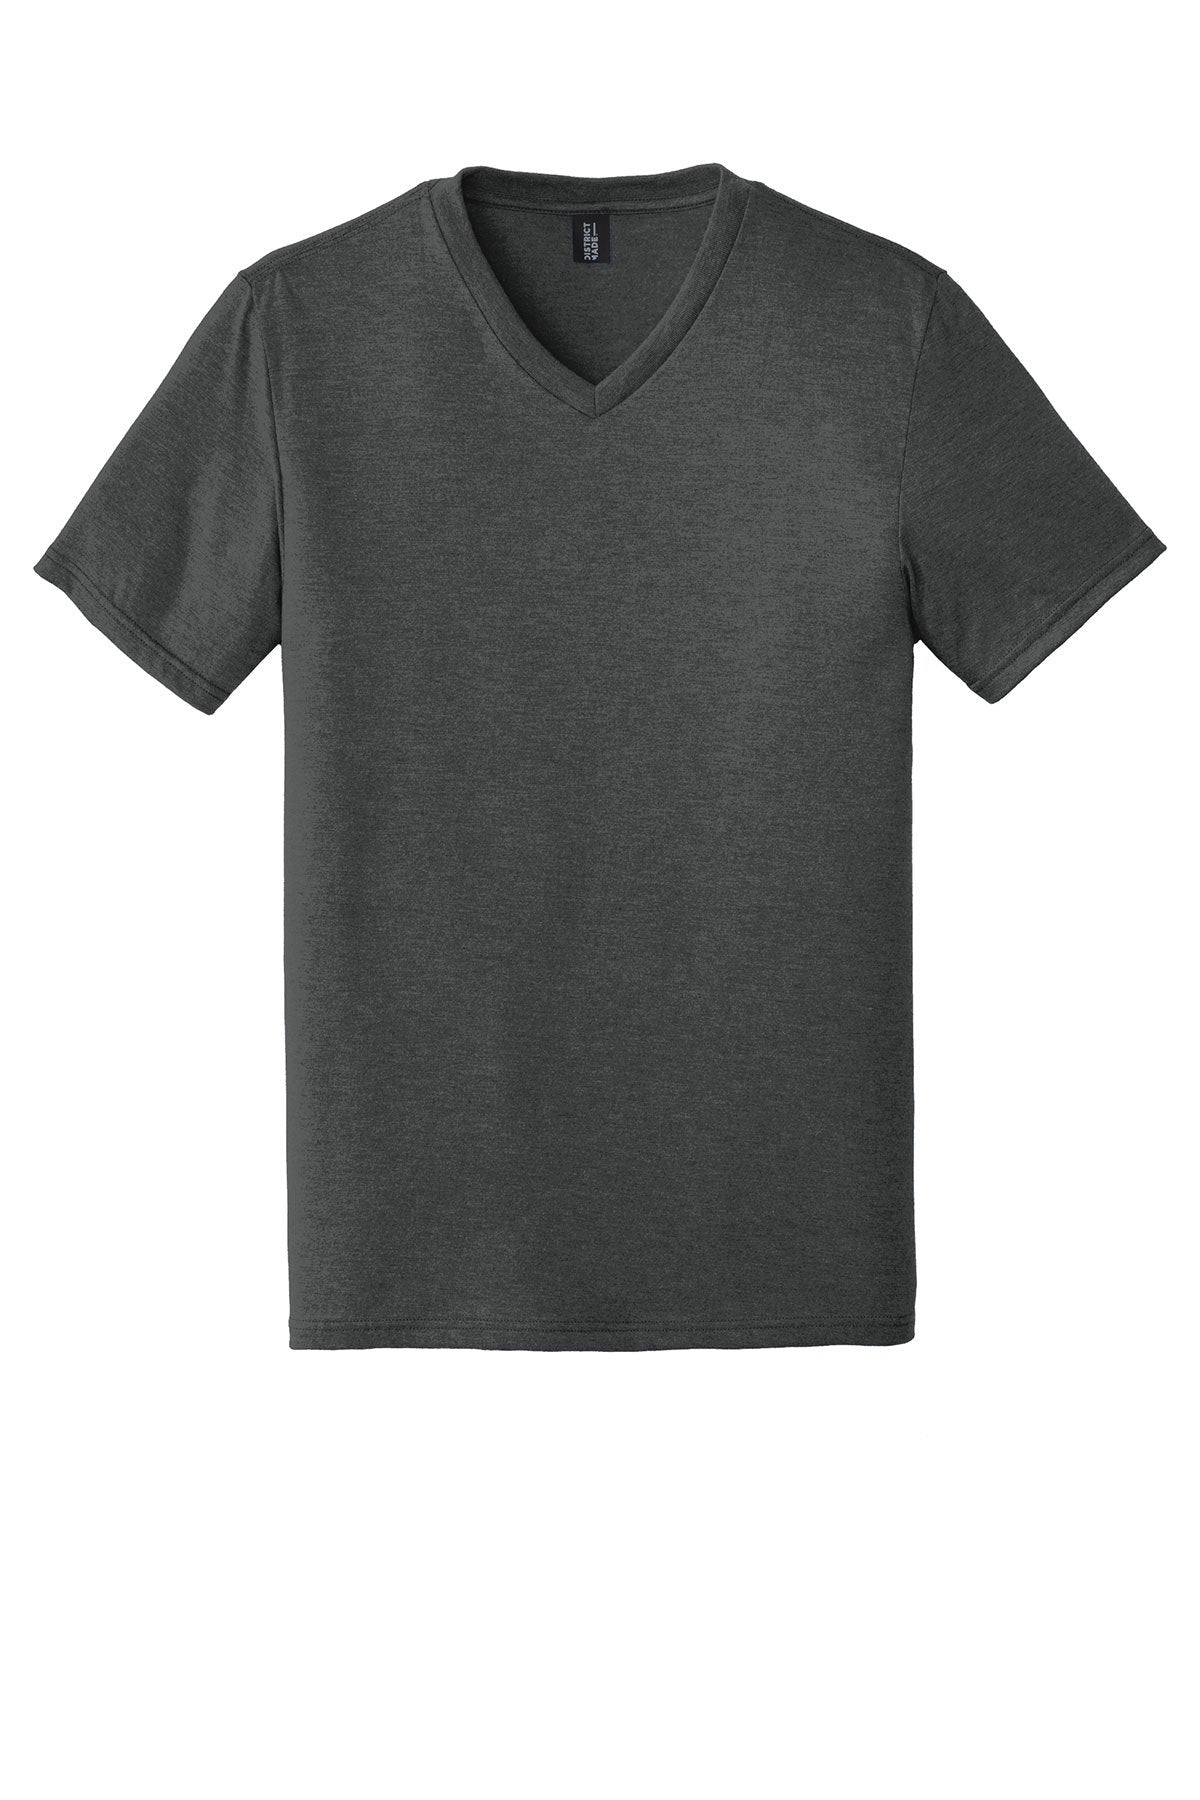 DT1350 District ® Perfect Tri ® V-Neck Tee